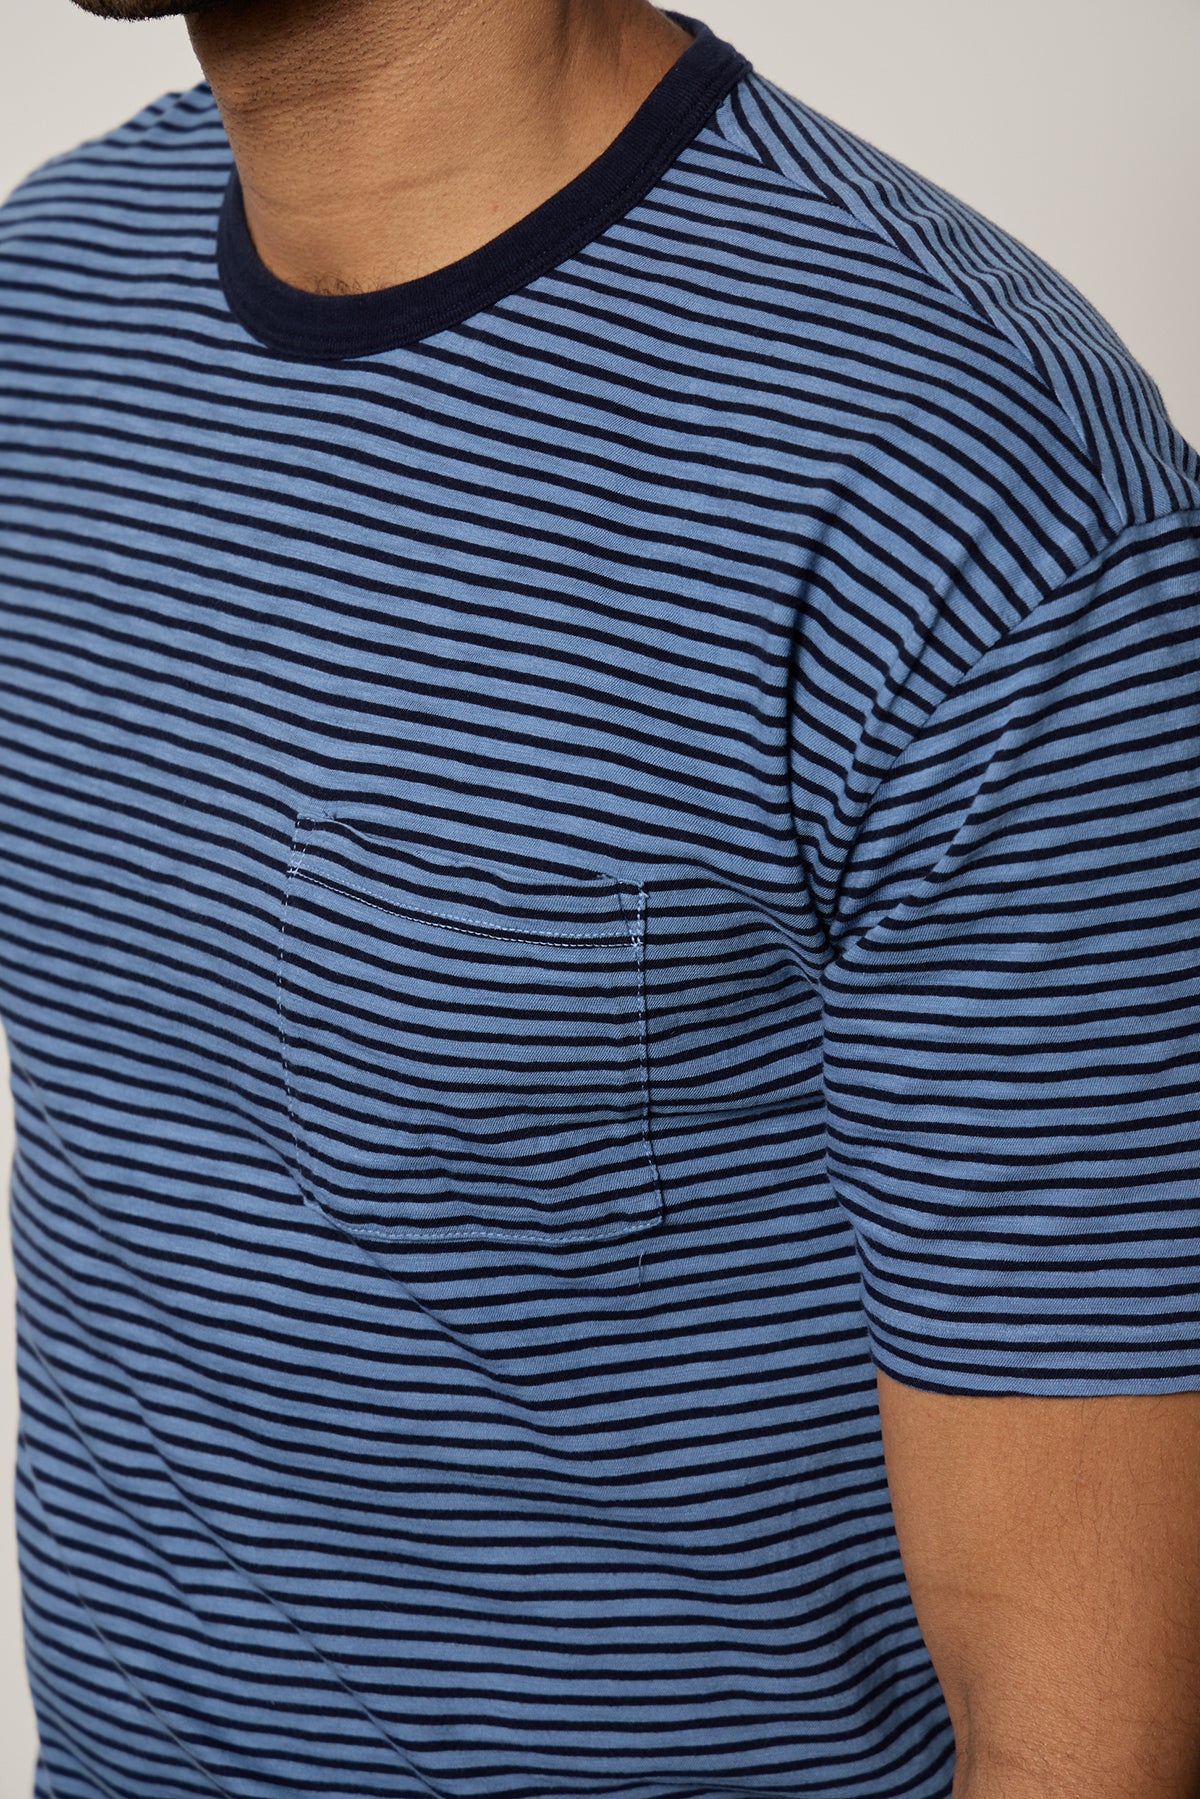 Jeremy Crew Neck Tee with medium and dark blue stripes, front pocket, front close up detail-26249324560577